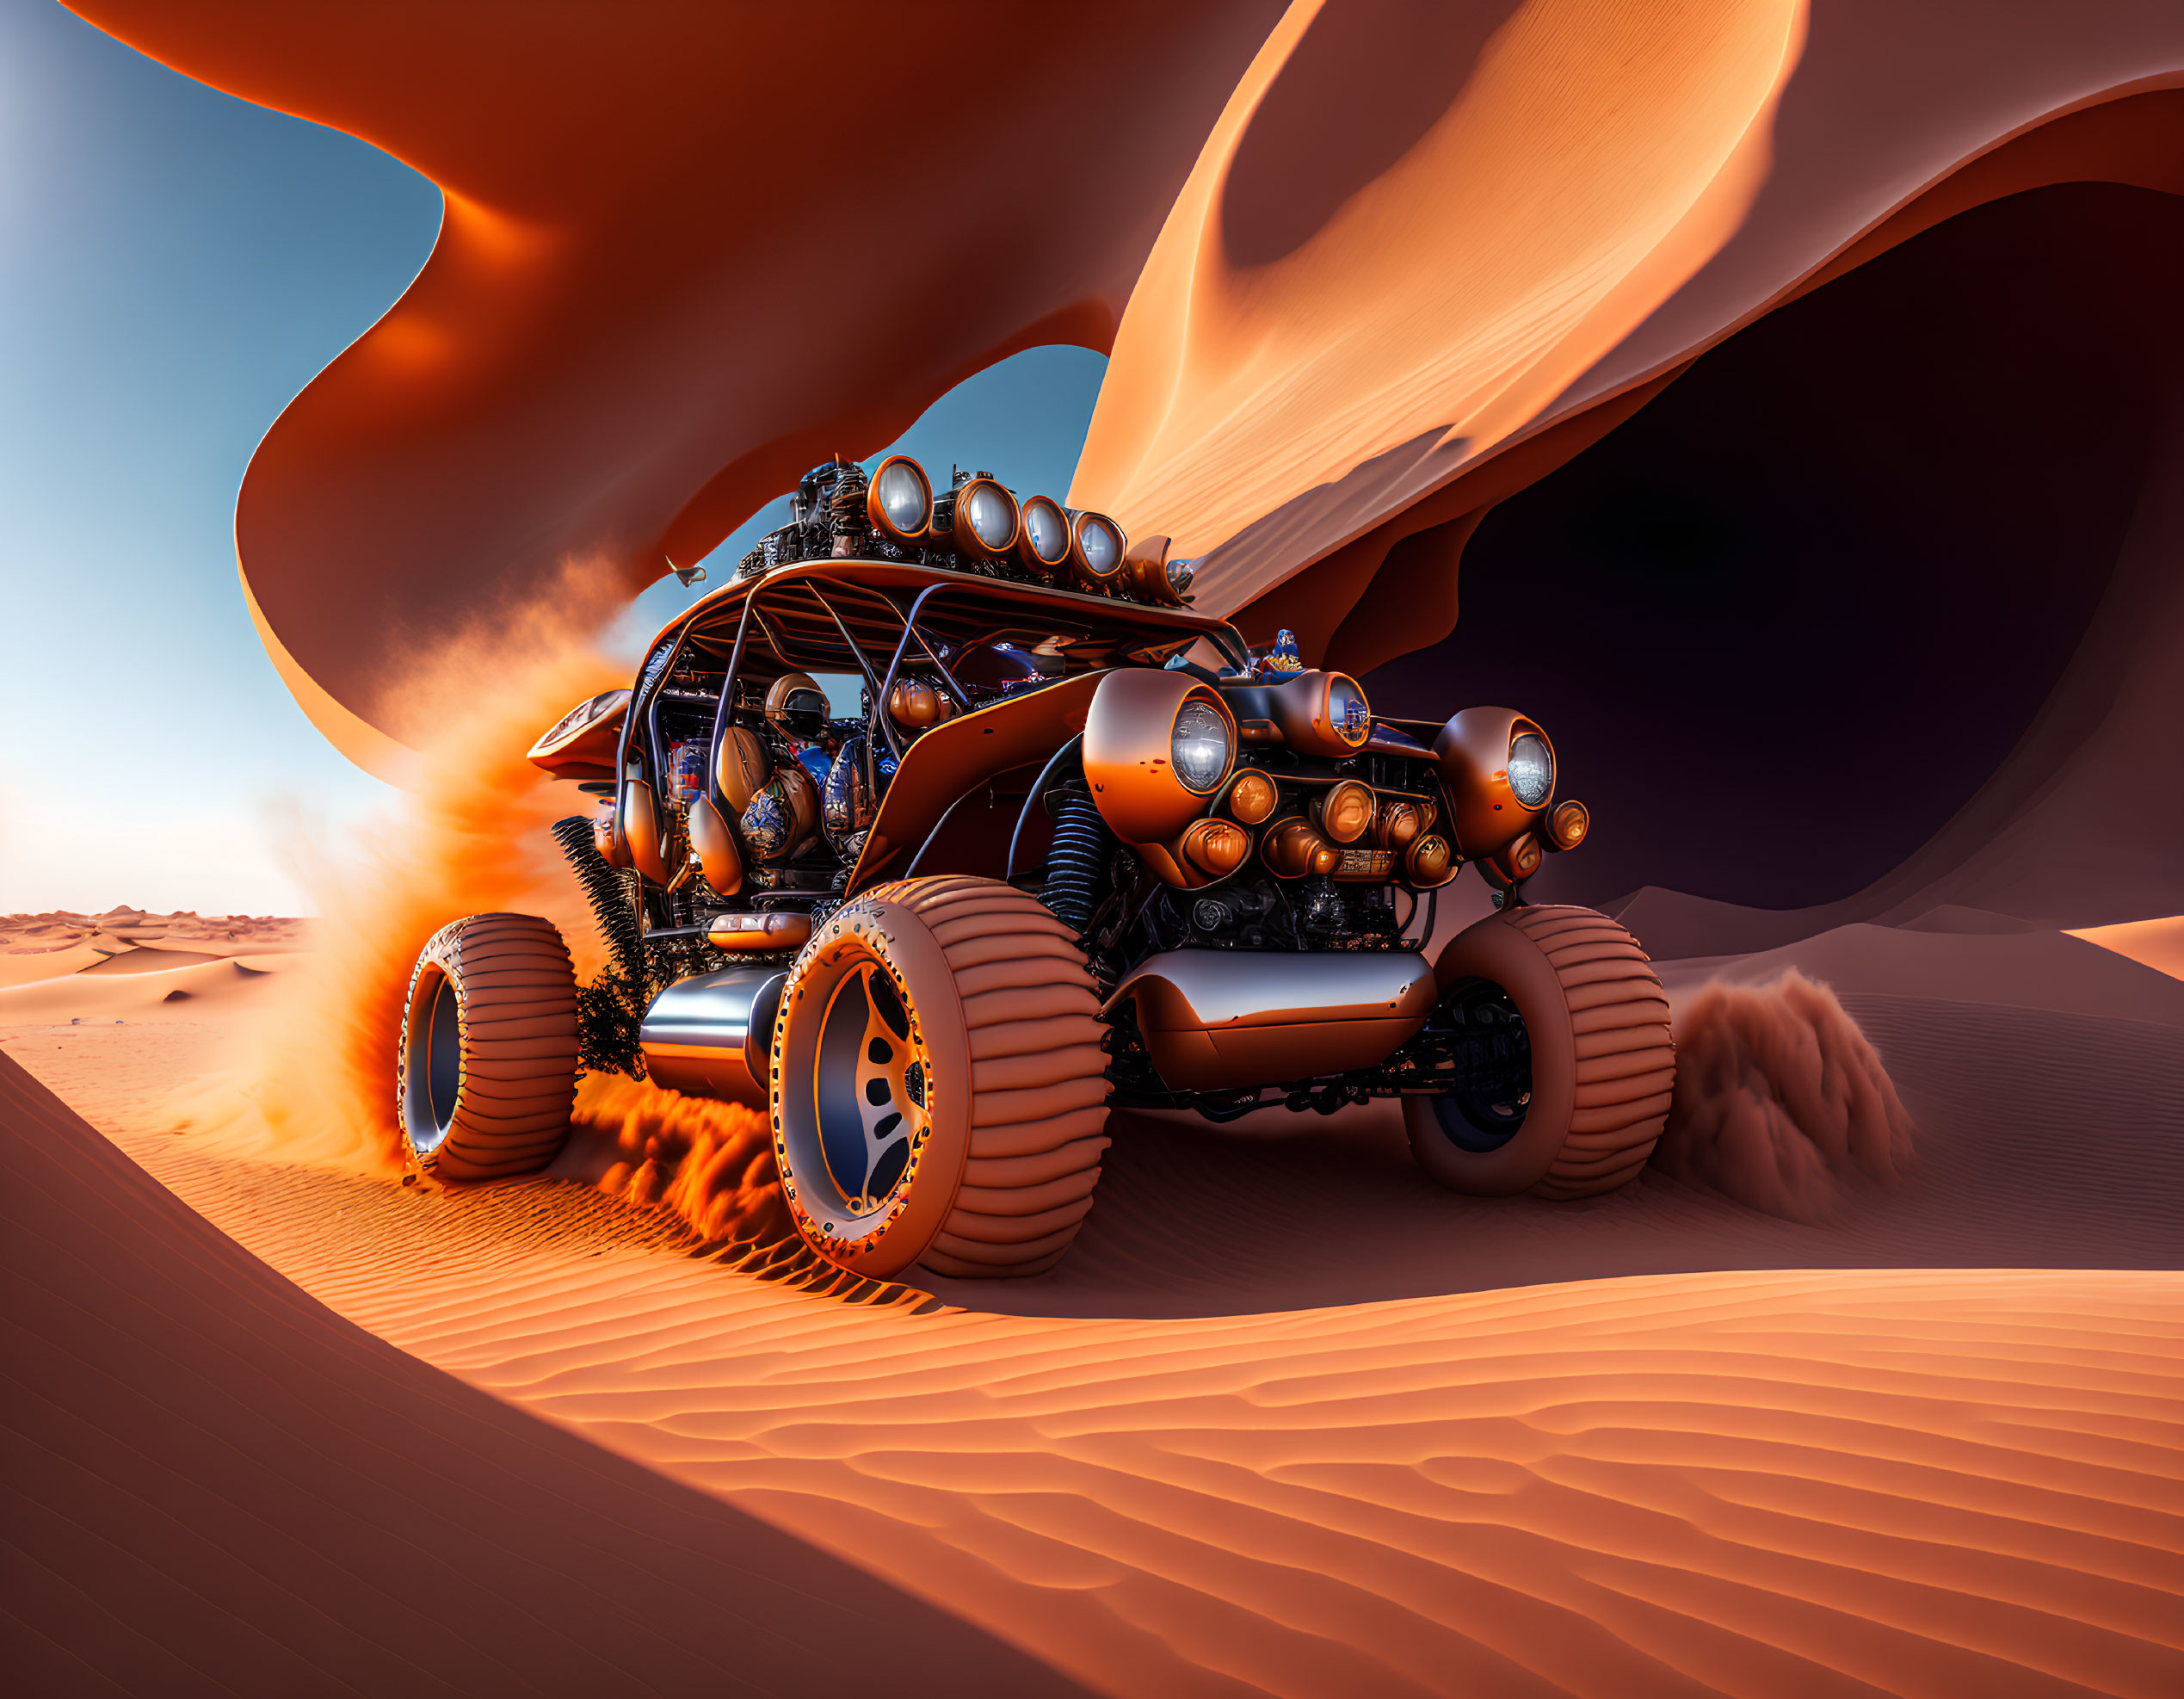 Futuristic off-road vehicle racing in desert with sand dunes